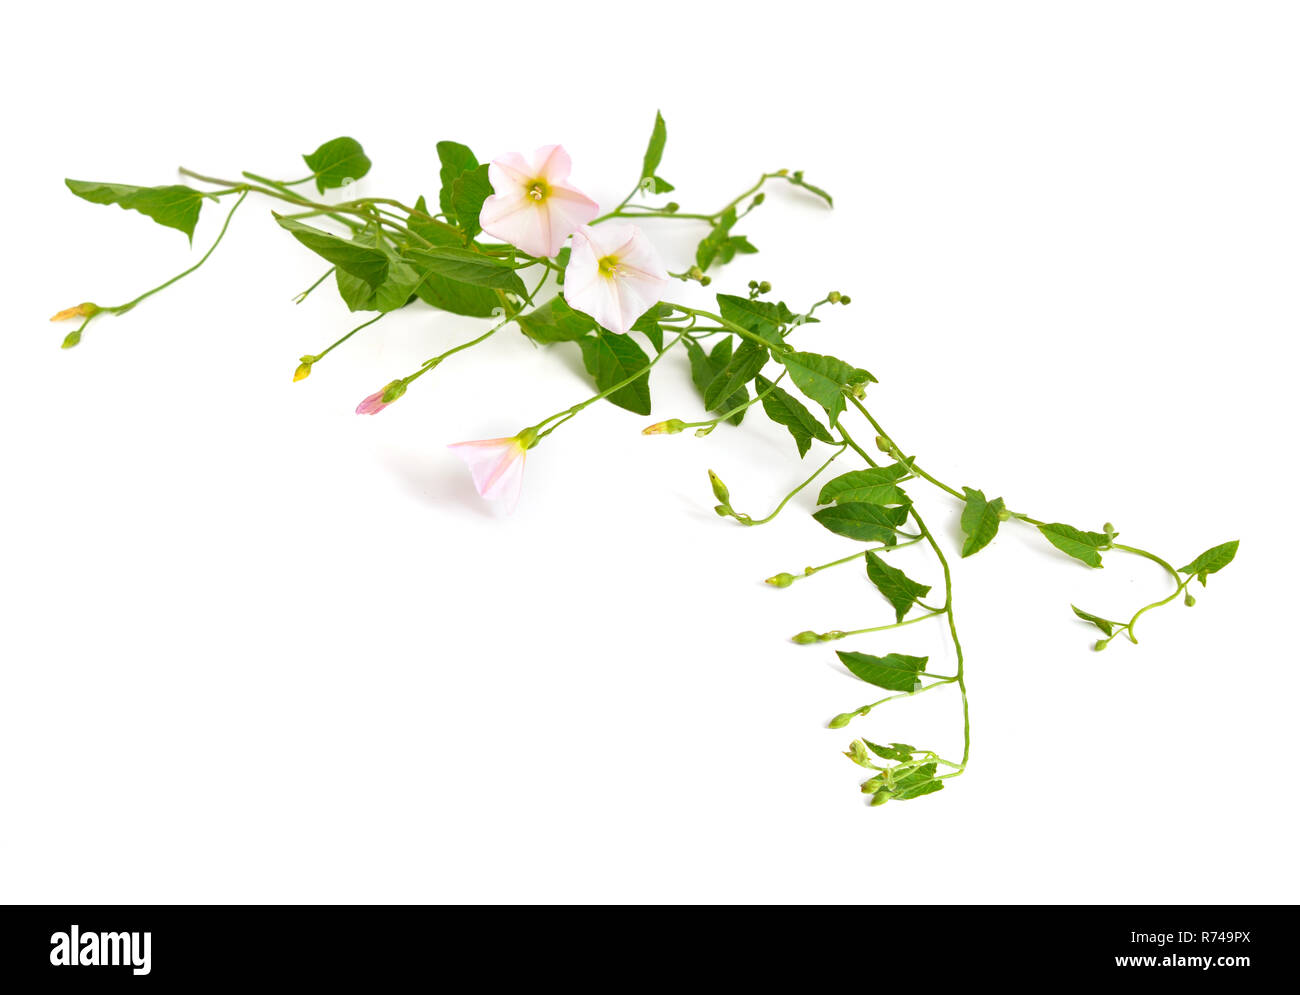 Convolvulus arvensis, field bindweed. Isolated on white background. Stock Photo